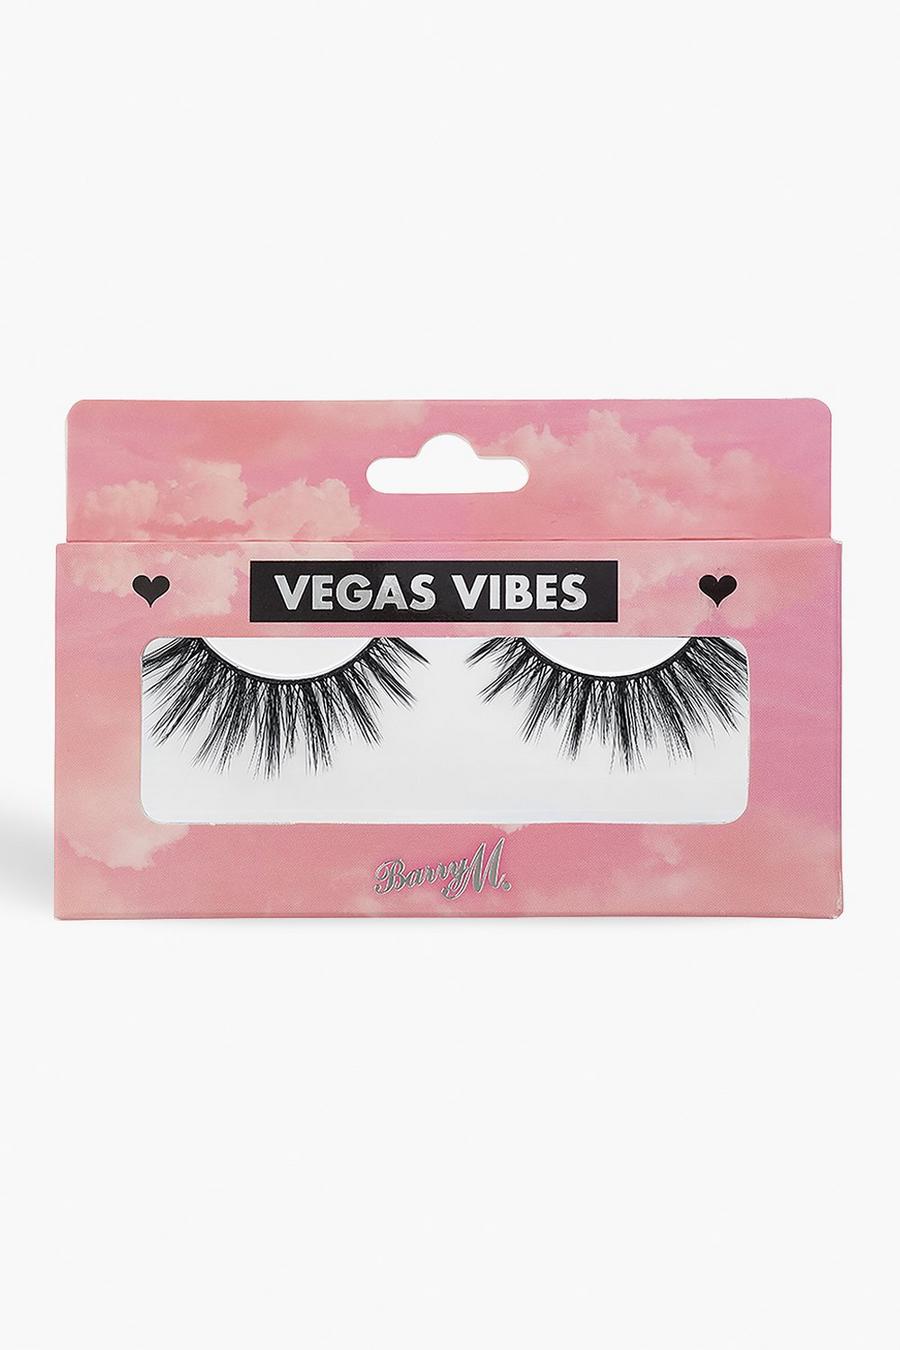 Faux cils Vegas Vibes Barry M image number 1